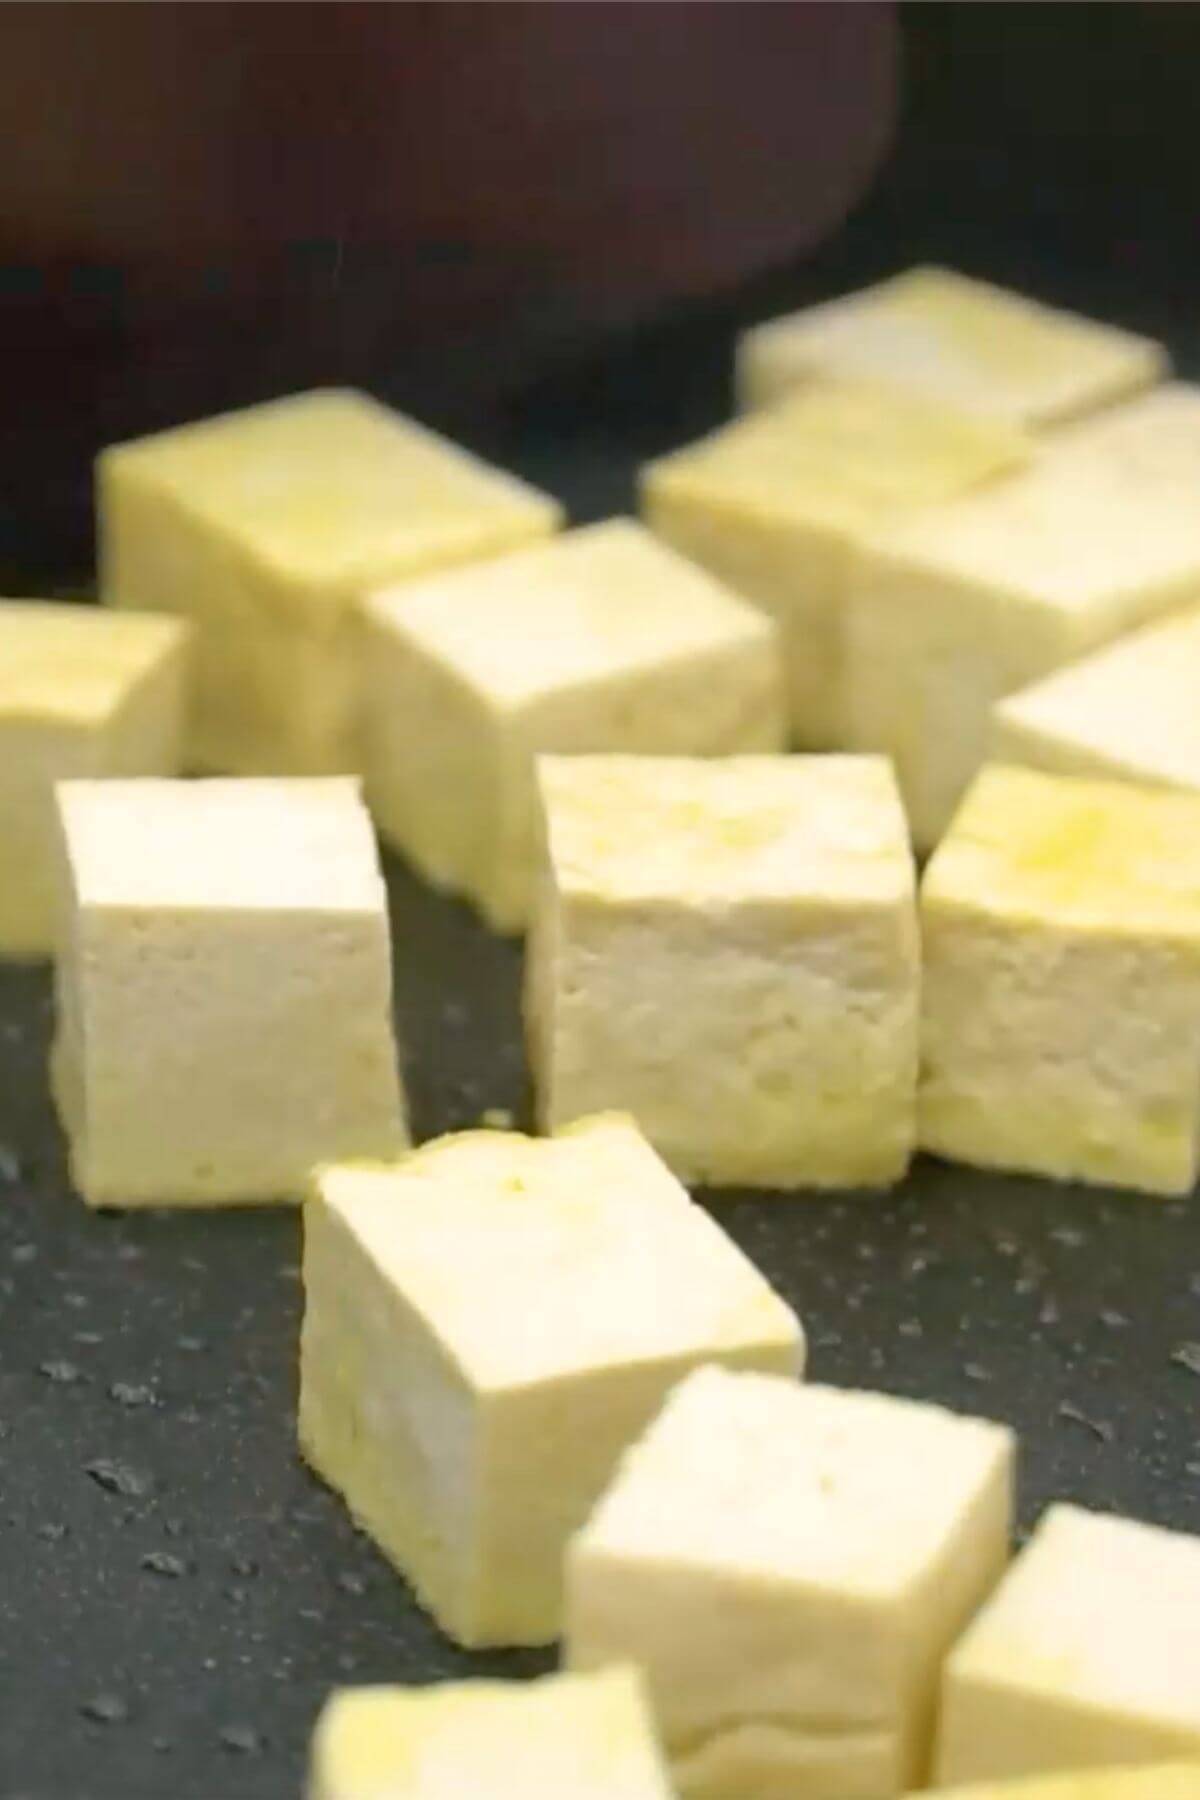 Tofu cubes are being cooked in a pan.